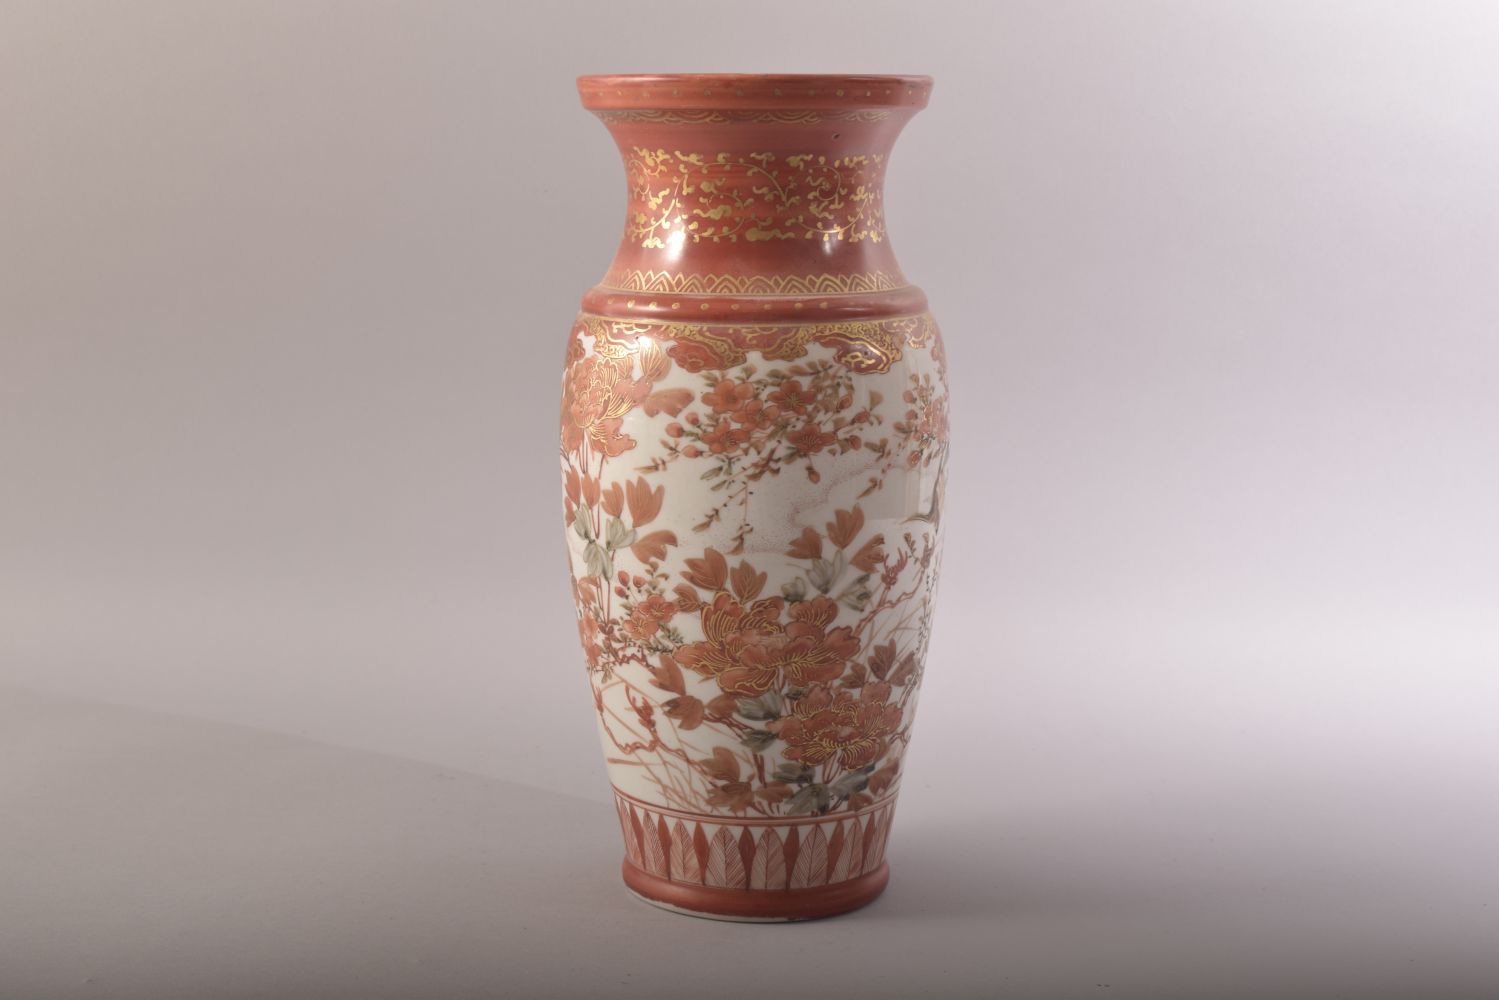 A JAPANESE KUTANI PORCELAIN VASE, painted with birds, native flora and gilt highlights, 30.5cm - Image 2 of 7